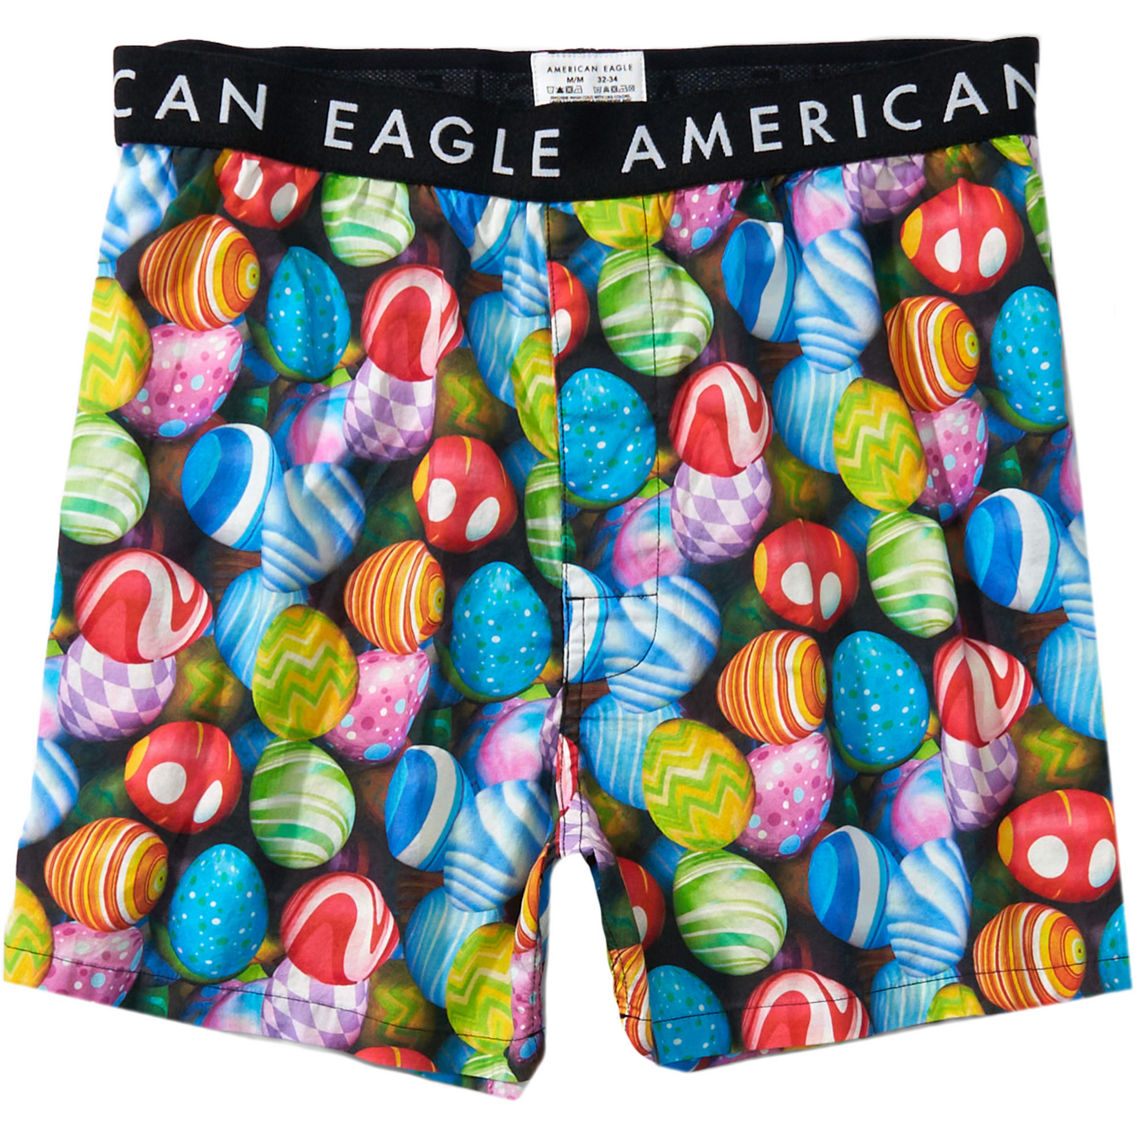 American Eagle Easter Eggs Stretch Boxer Shorts - Image 3 of 5